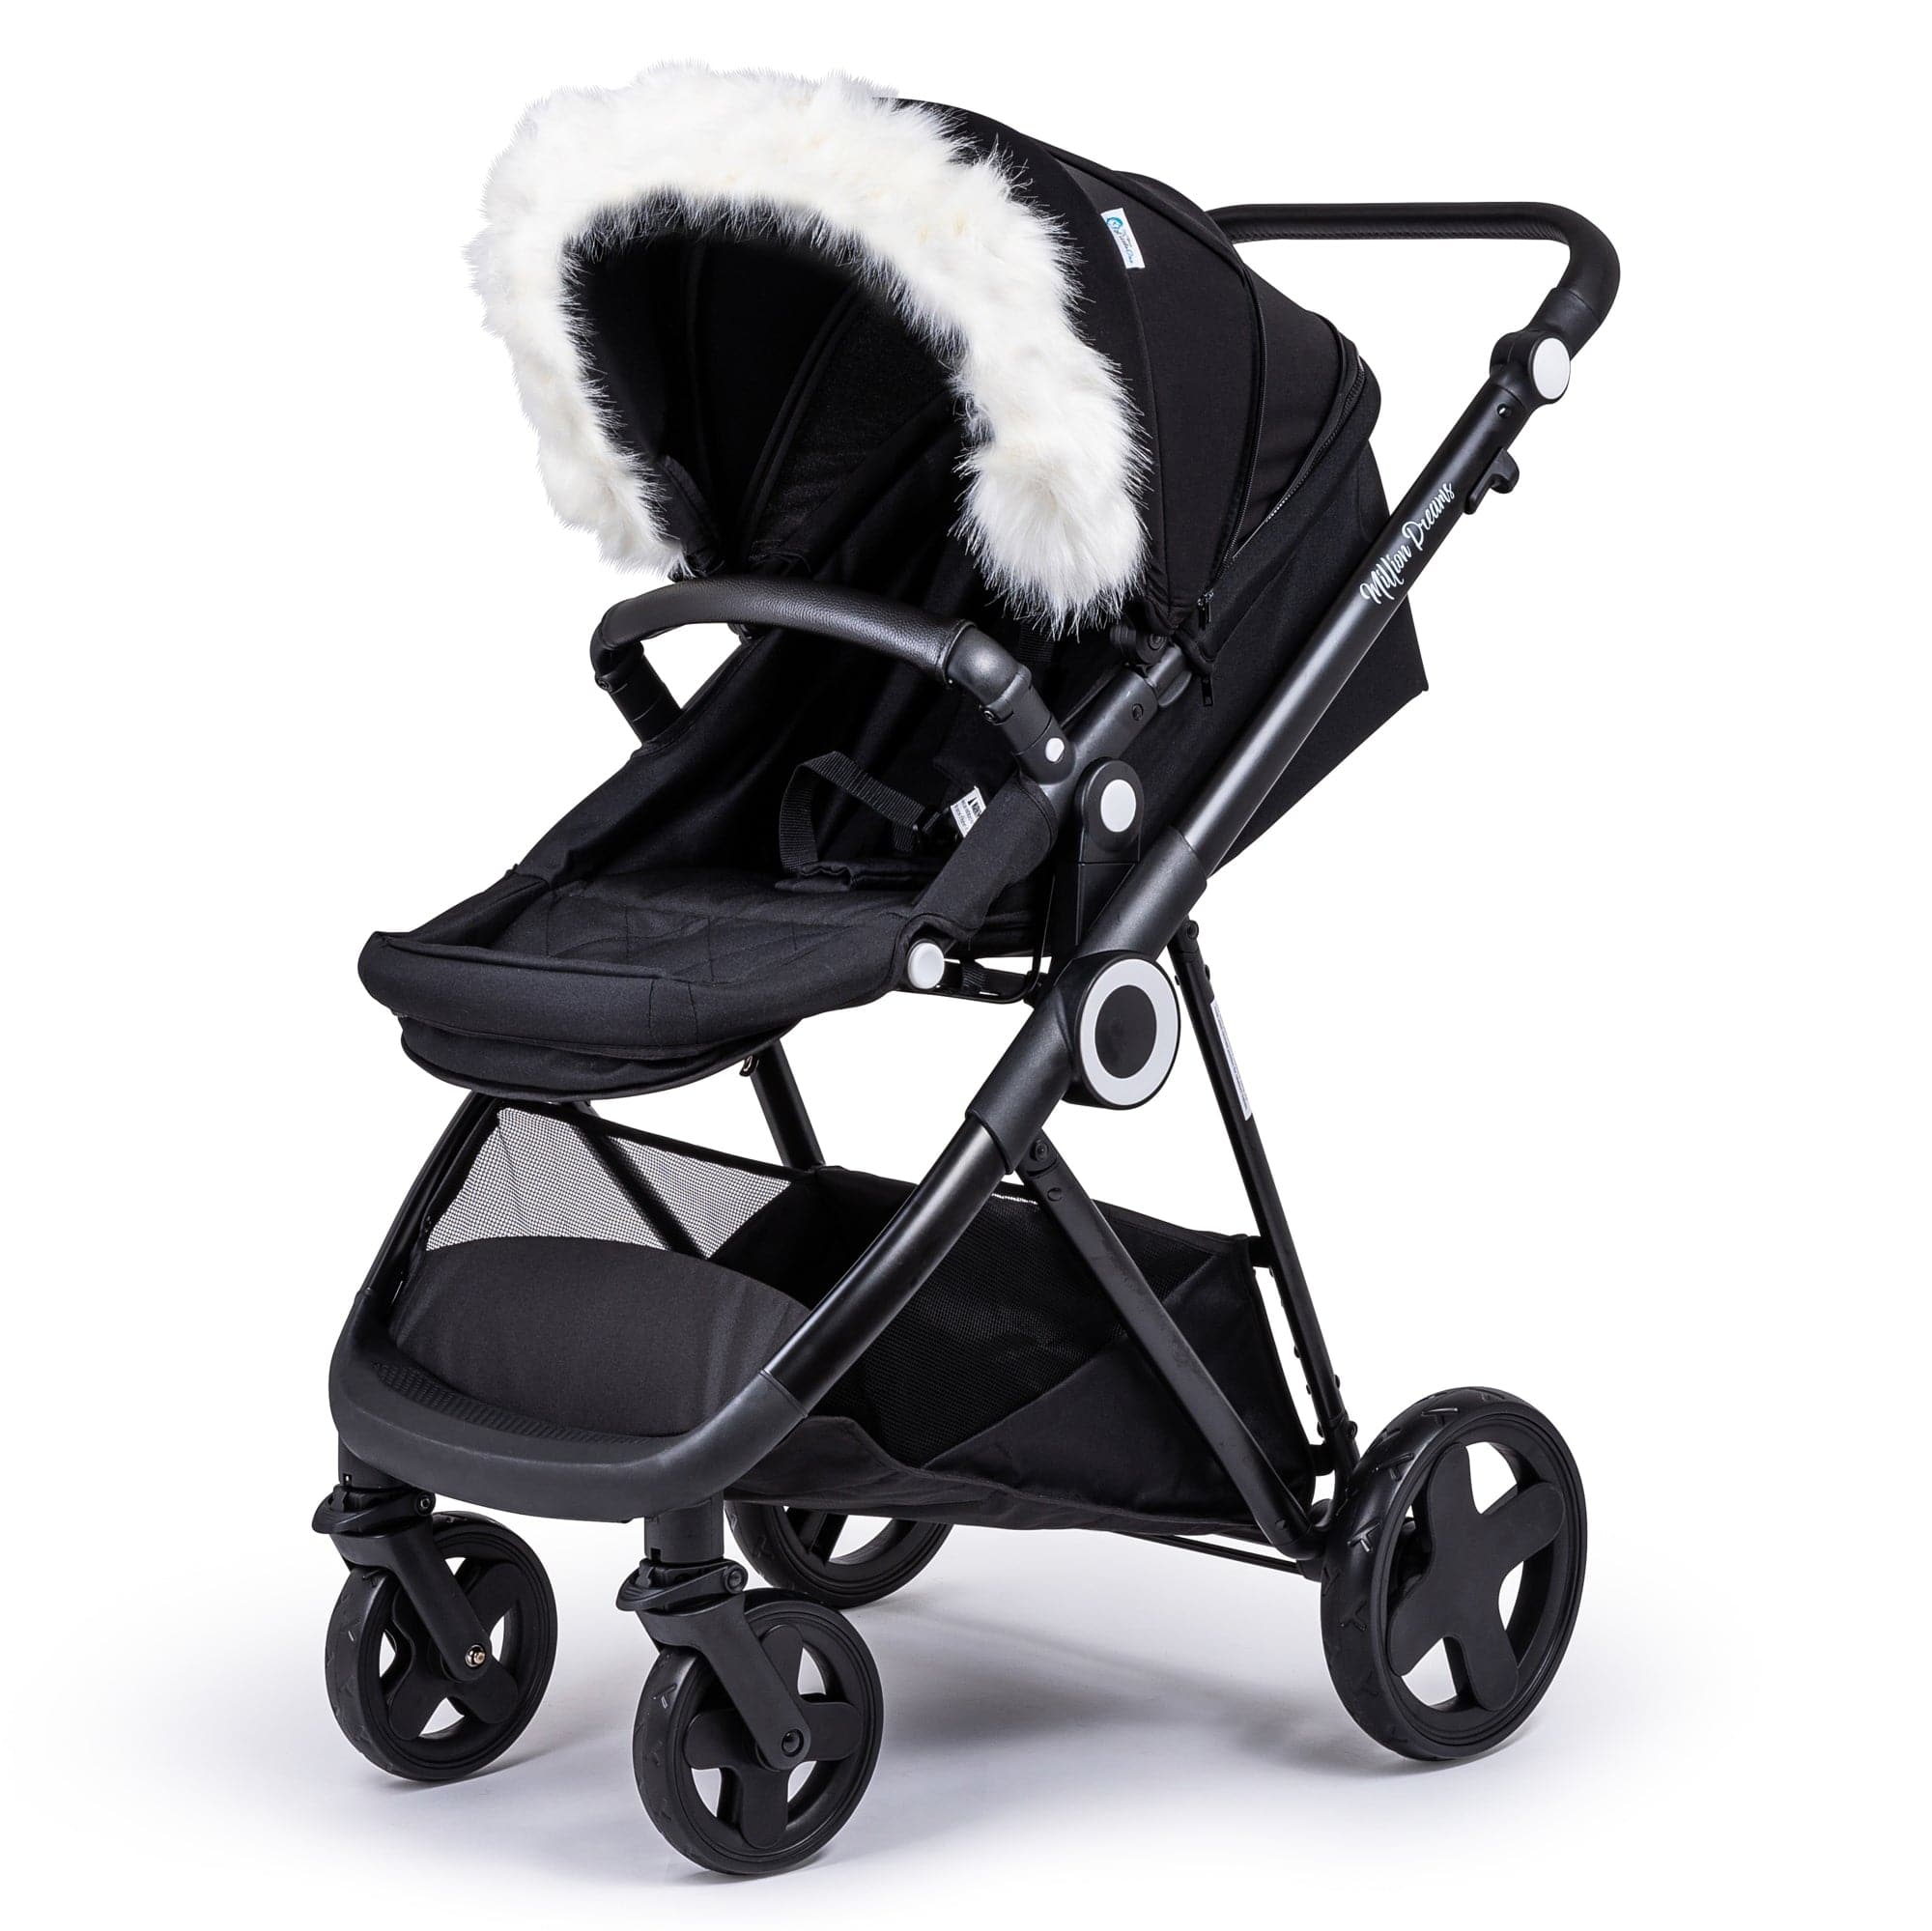 Pram Fur Hood Trim Attachment For Pushchair Compatible with Orbit Baby - For Your Little One